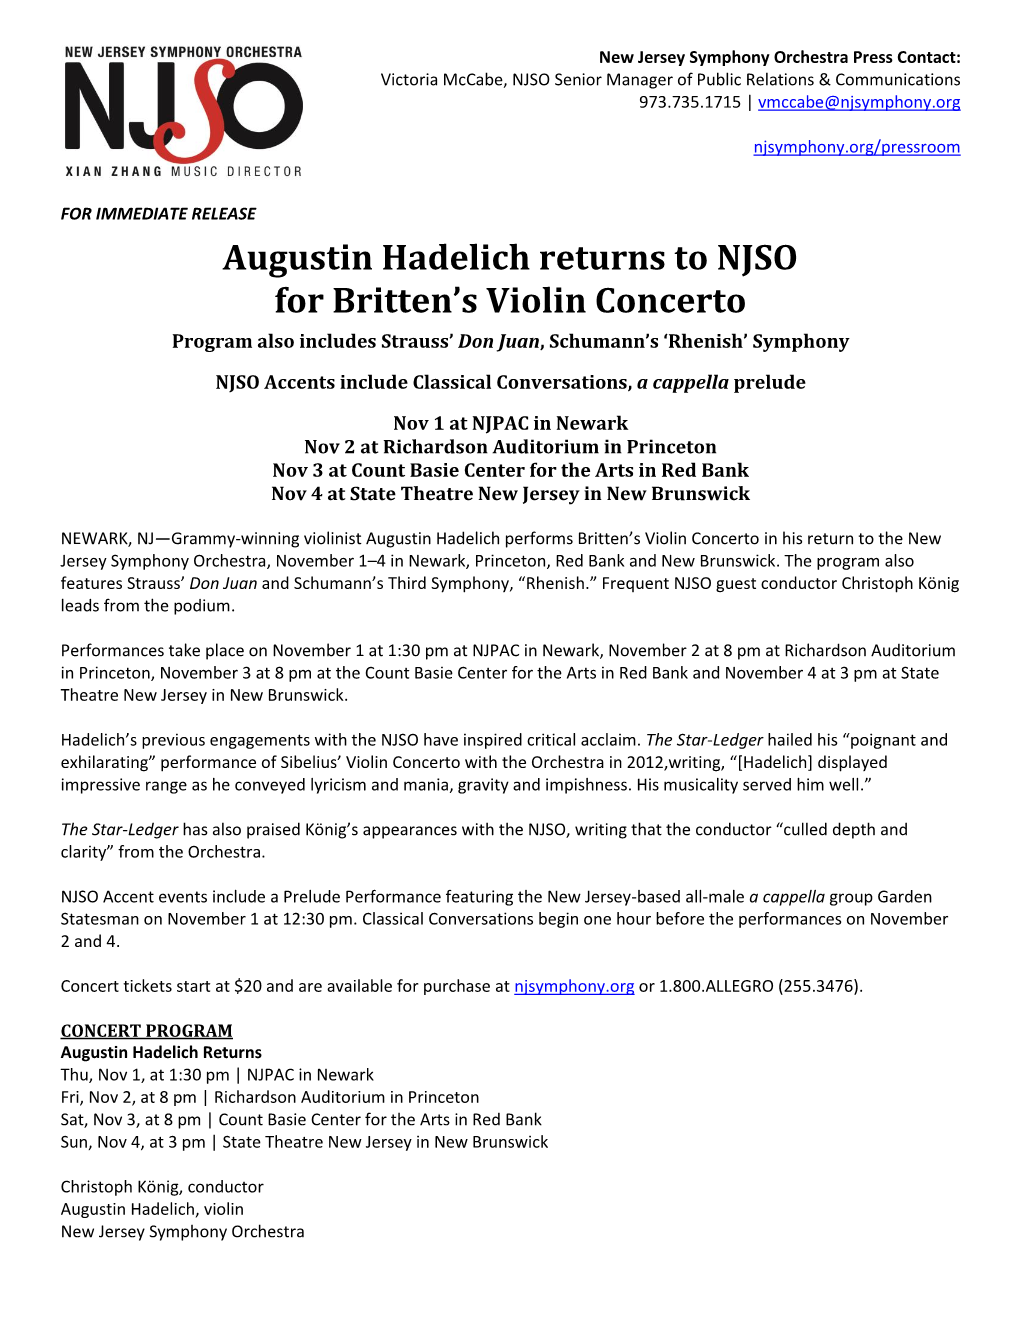 Augustin Hadelich Returns to NJSO for Britten's Violin Concerto